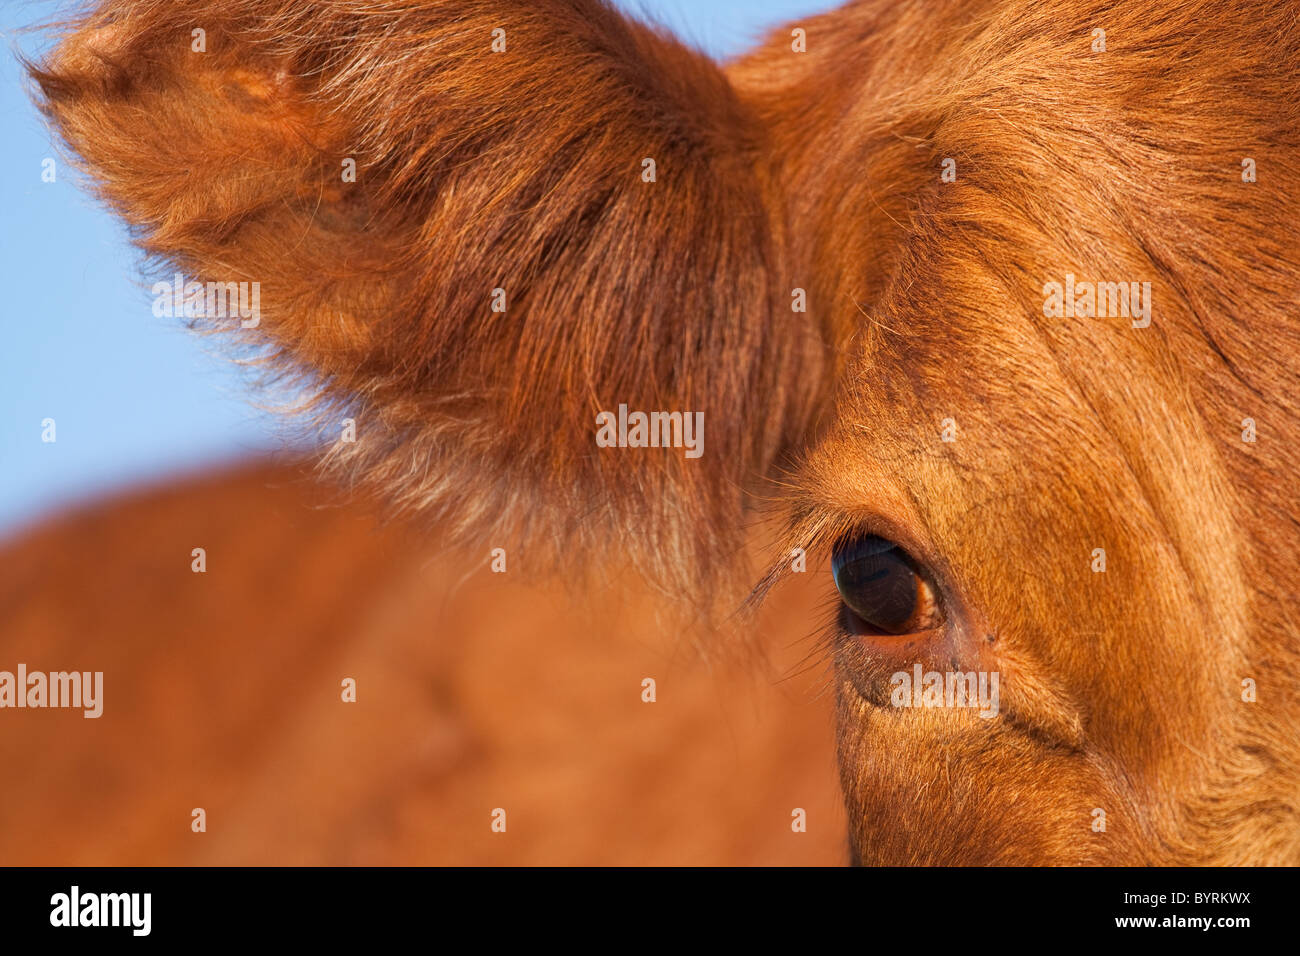 Livestock - Closeup of the ear and eye of a Red Angus beef cow / Alberta, Canada. Stock Photo